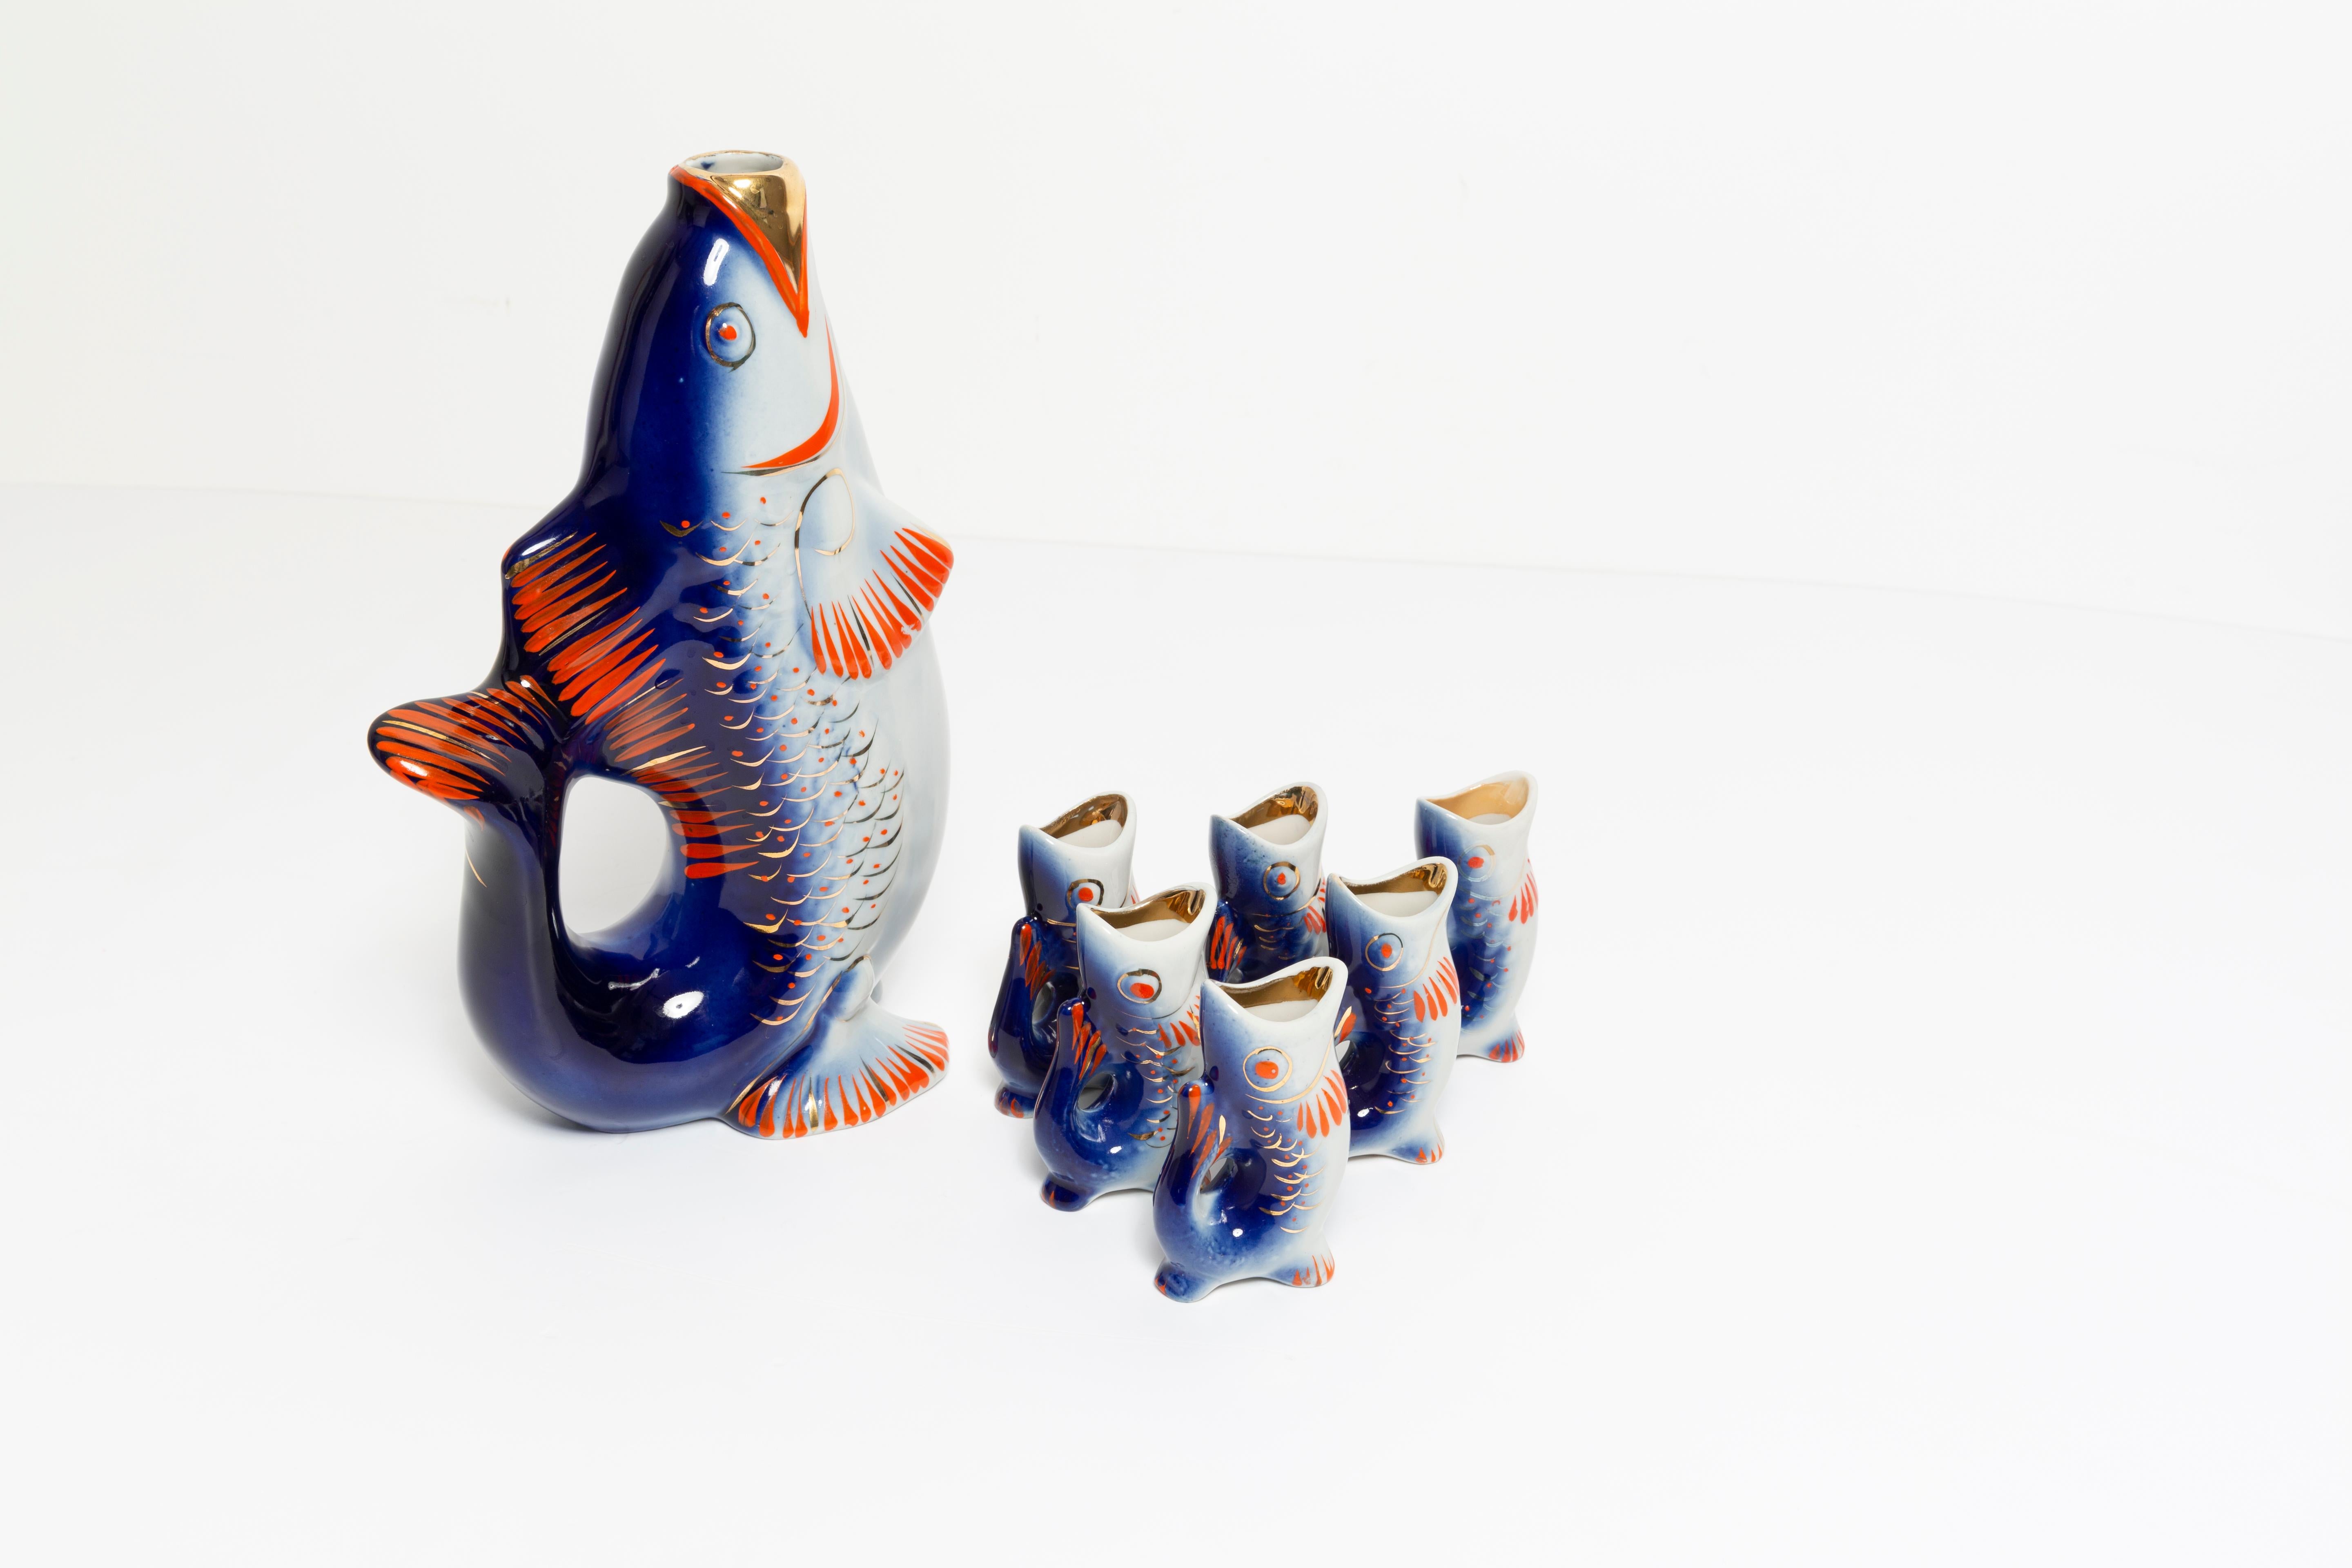 Blue Fish Glass Decanter and Glasses, 20th Century, Europe, 1960s For Sale 4